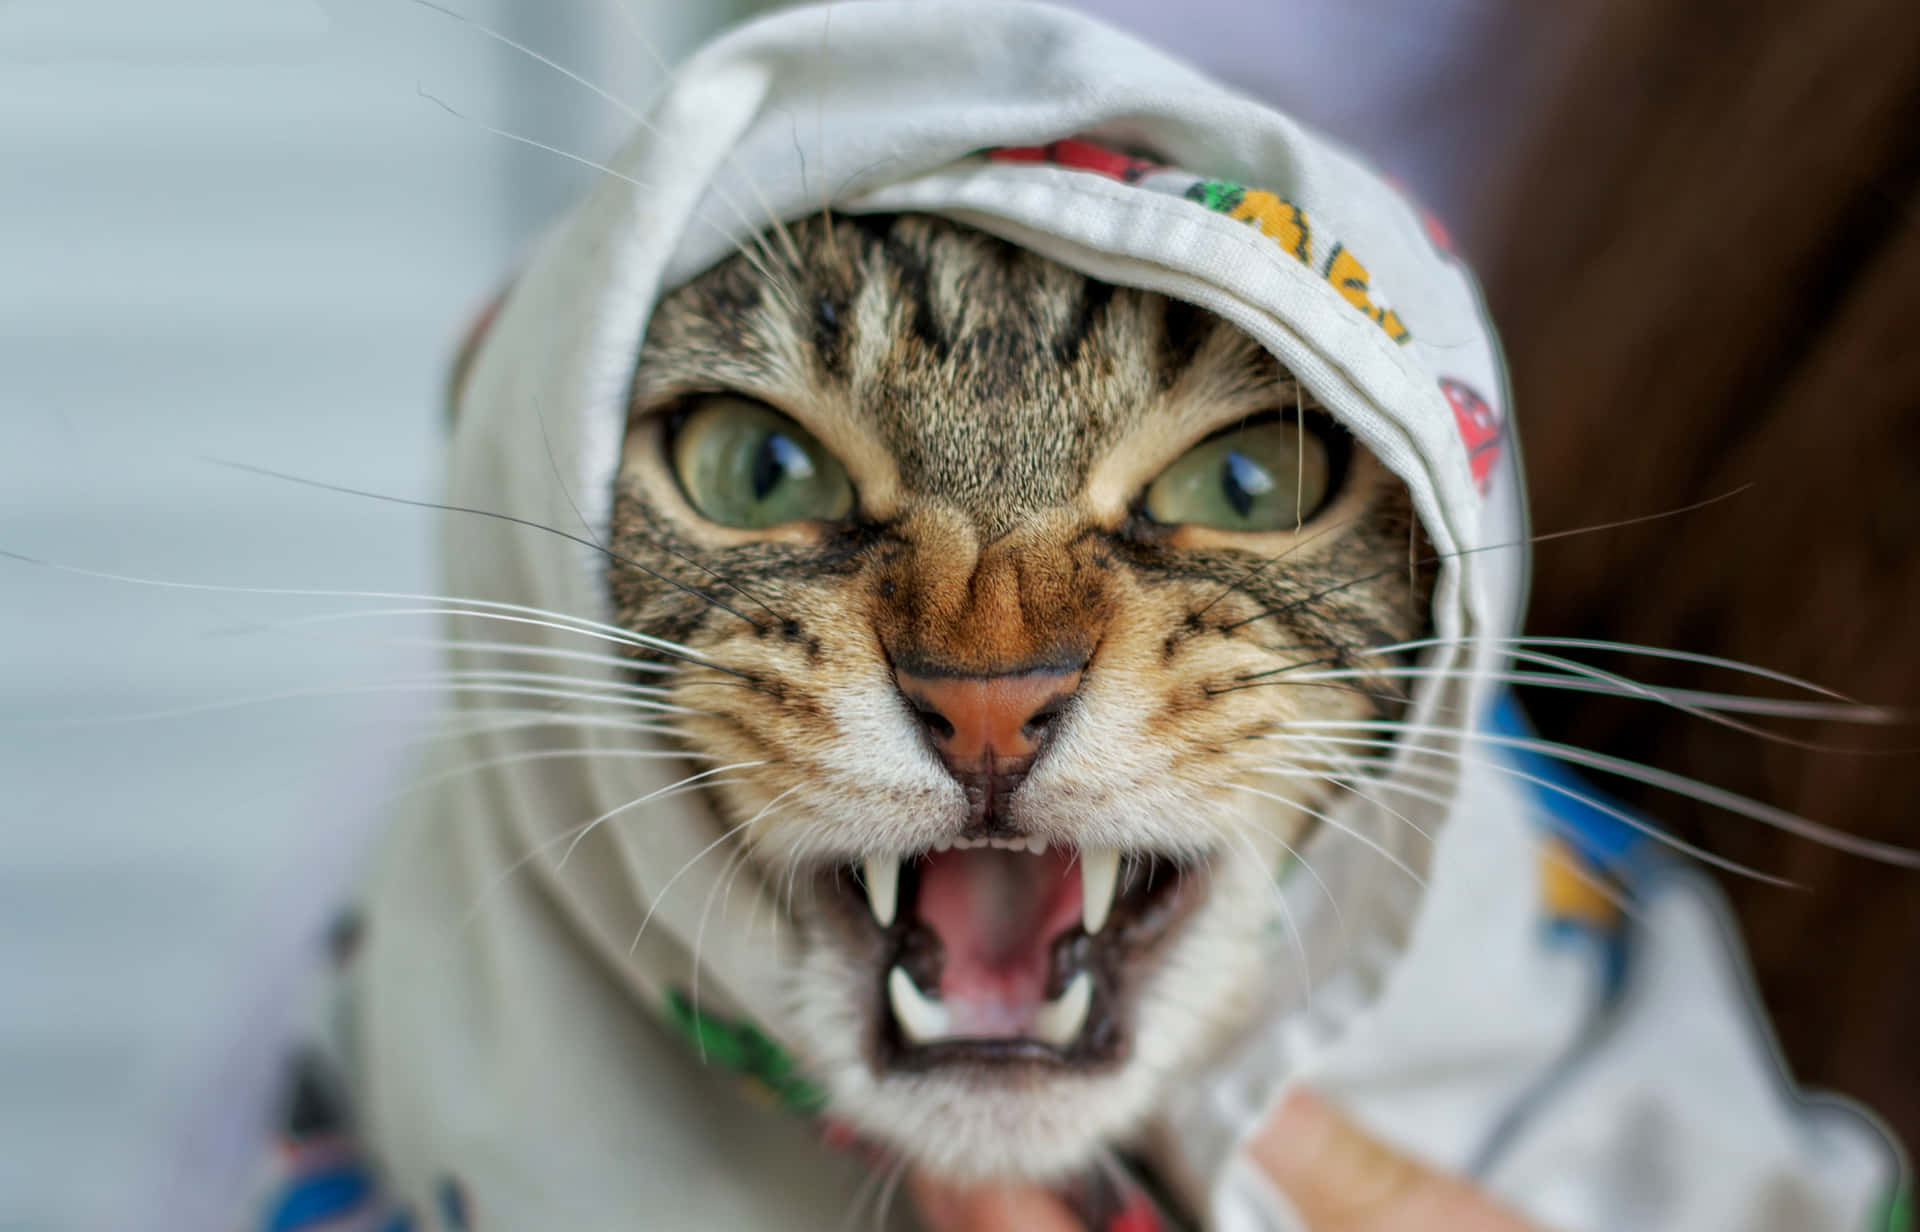 A Cat With Its Mouth Open Is Being Held By A Person